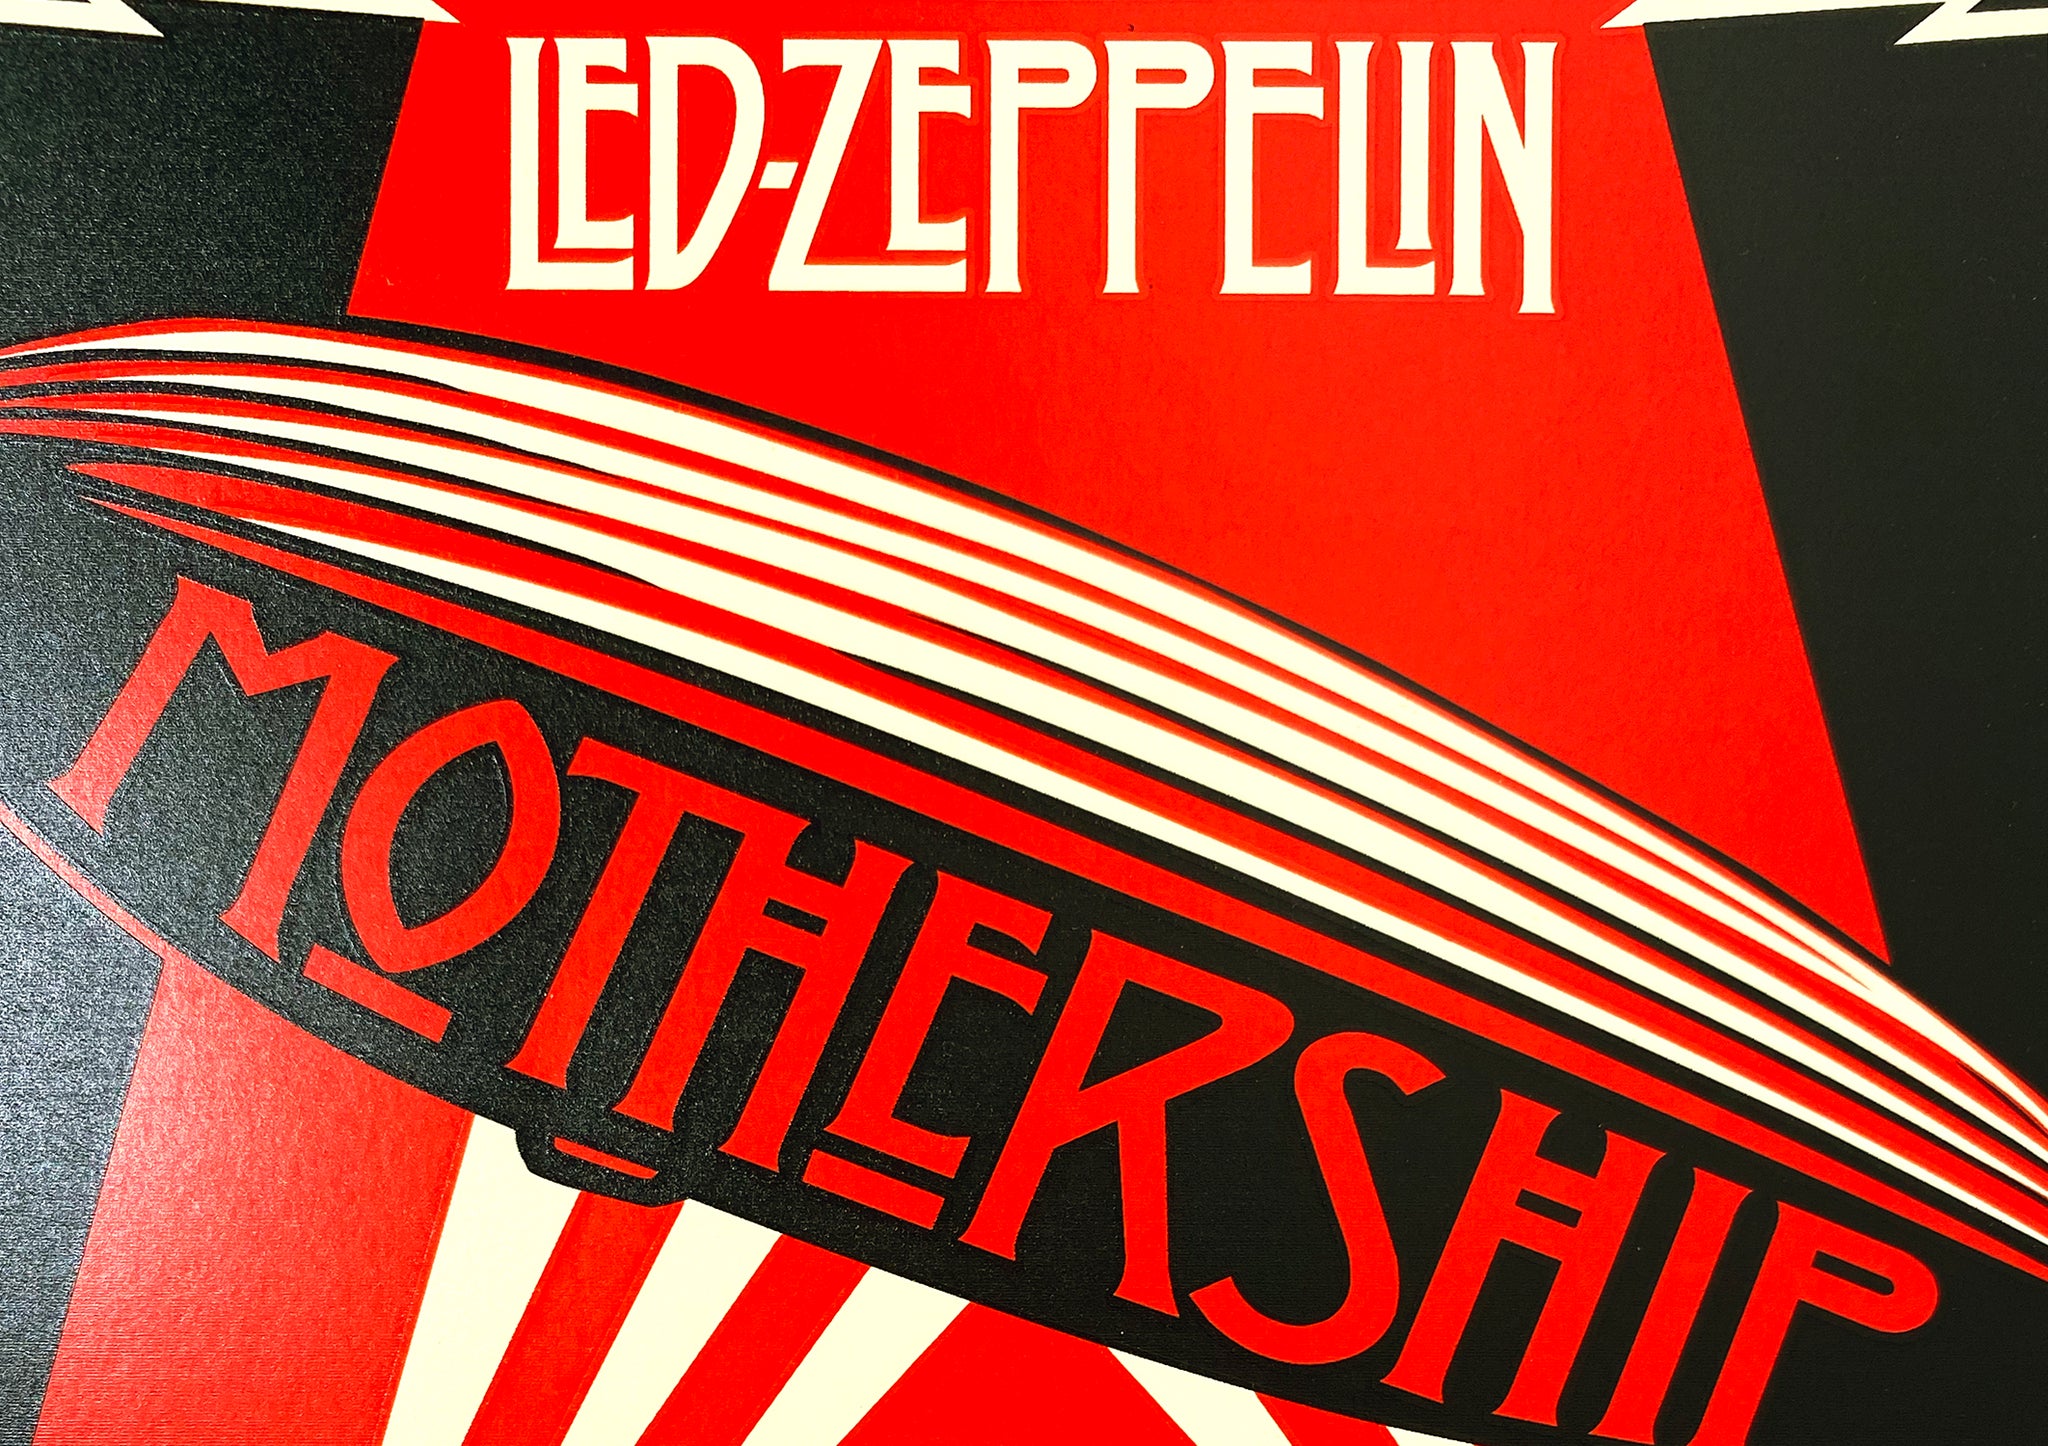 LED ZEPPELIN MOTHERSHIP iPhone 7 Plus Case Cover